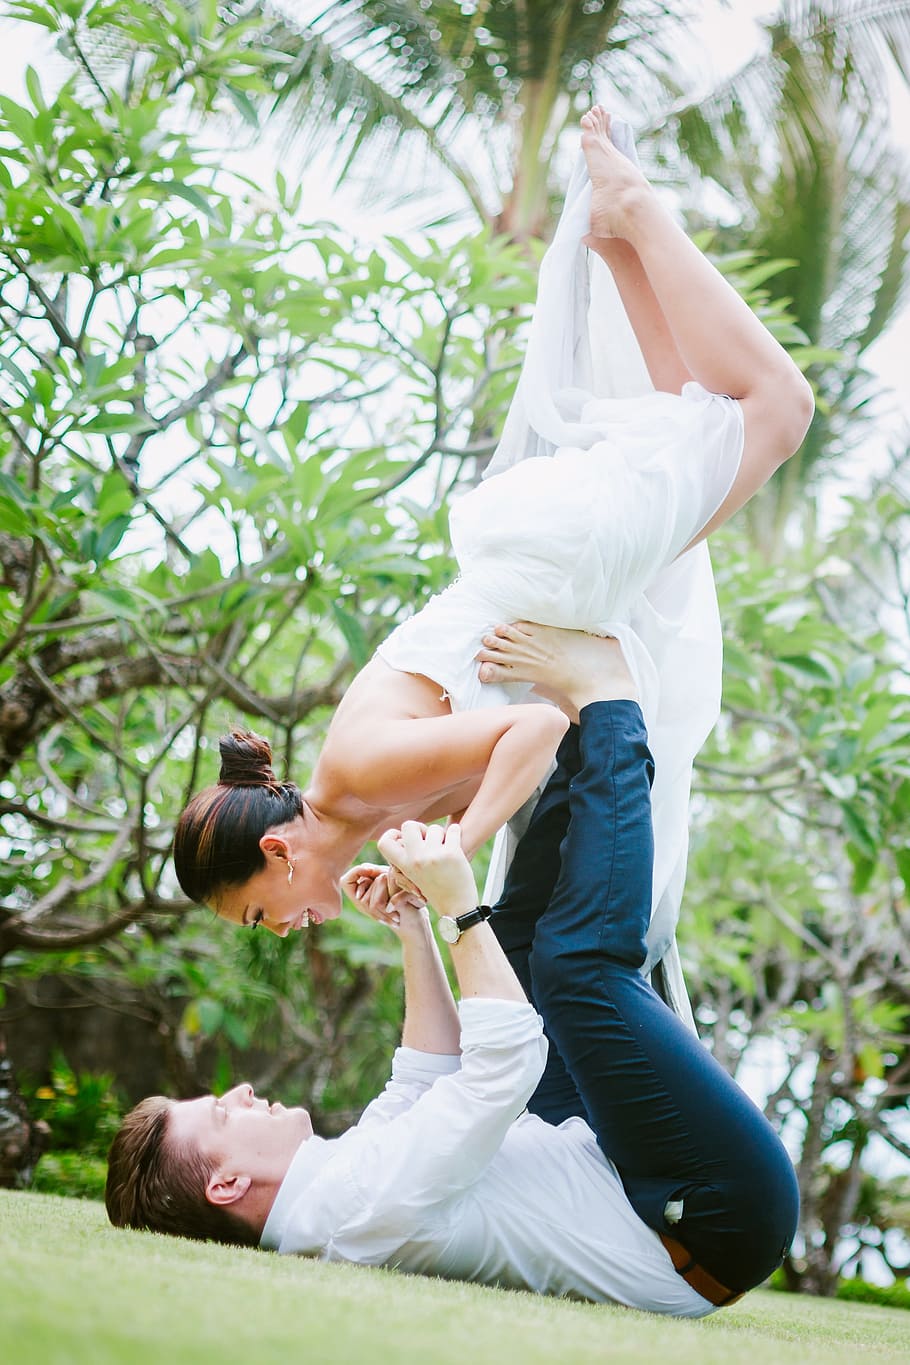 man lifting woman with both hand and feet during daytime, yoga